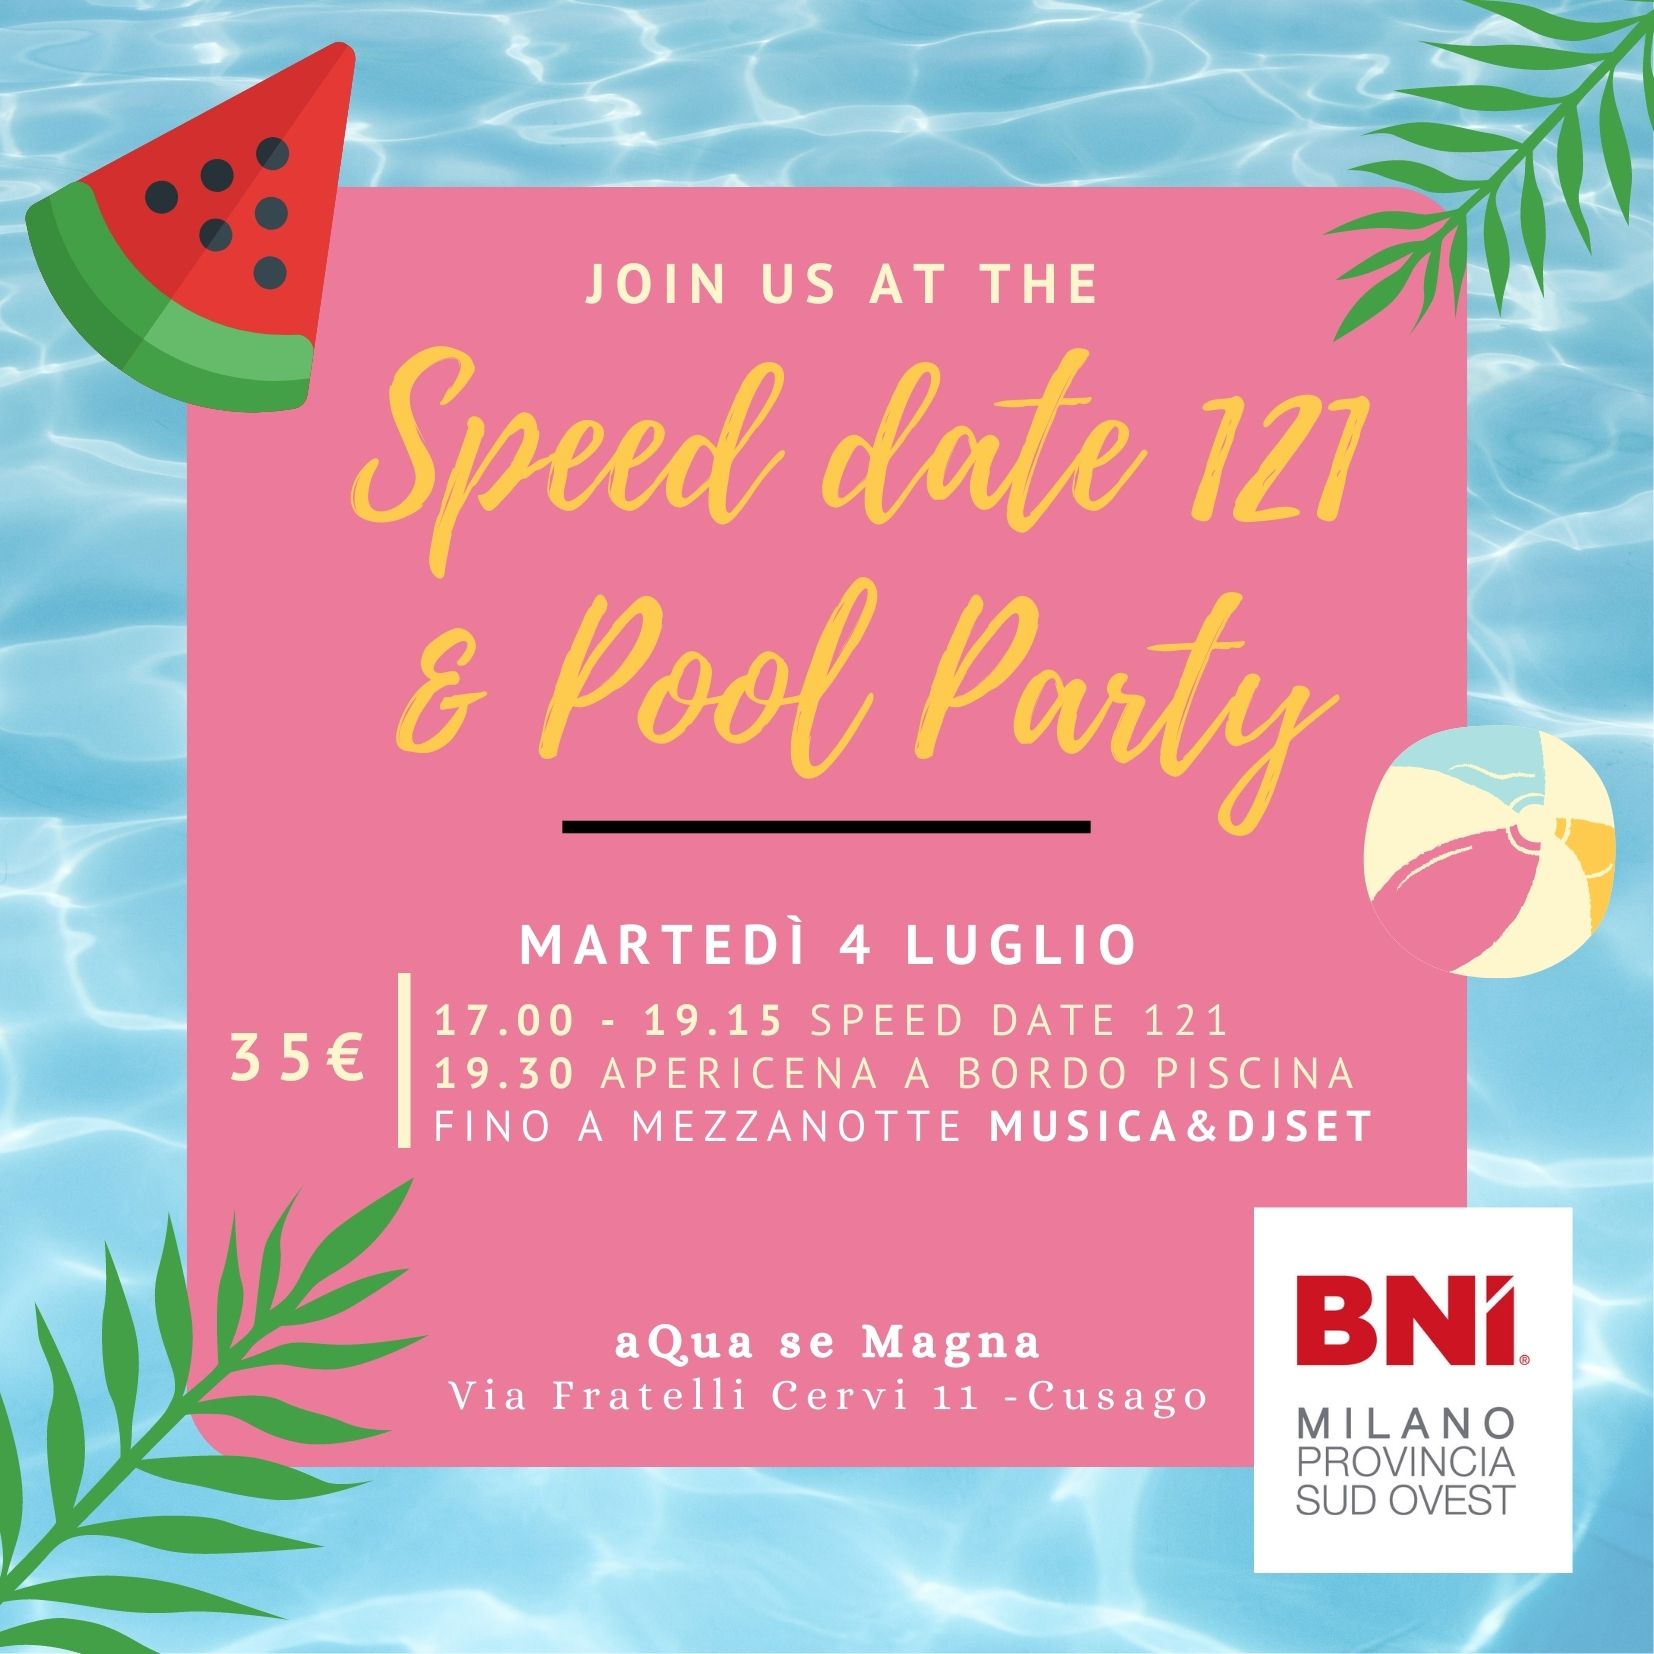 BNI Speed date 121 & Pool Party